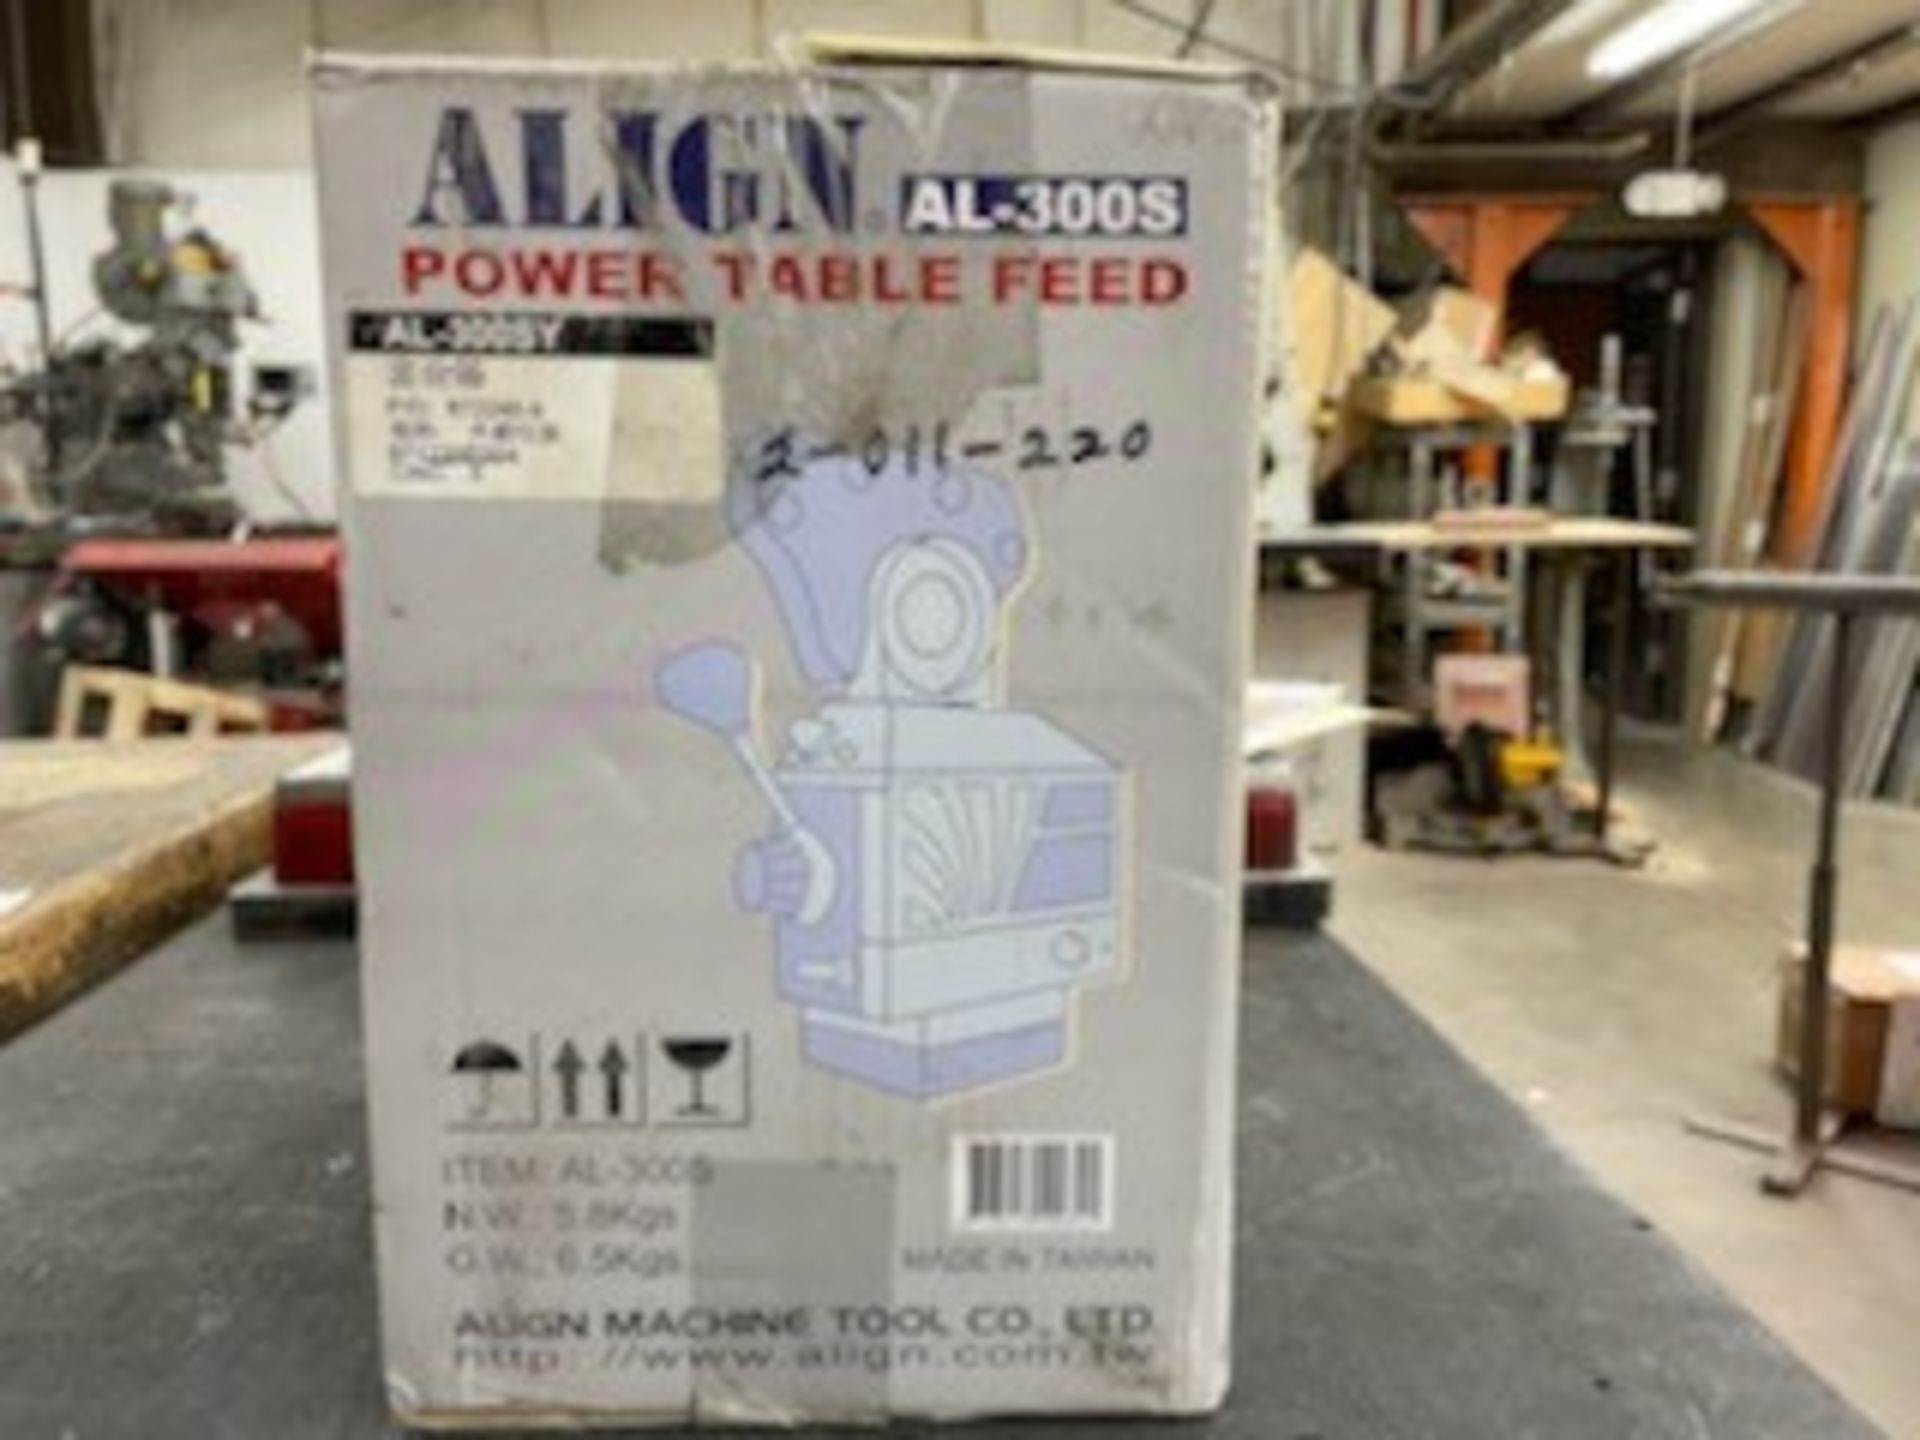 Align Power Table Feed